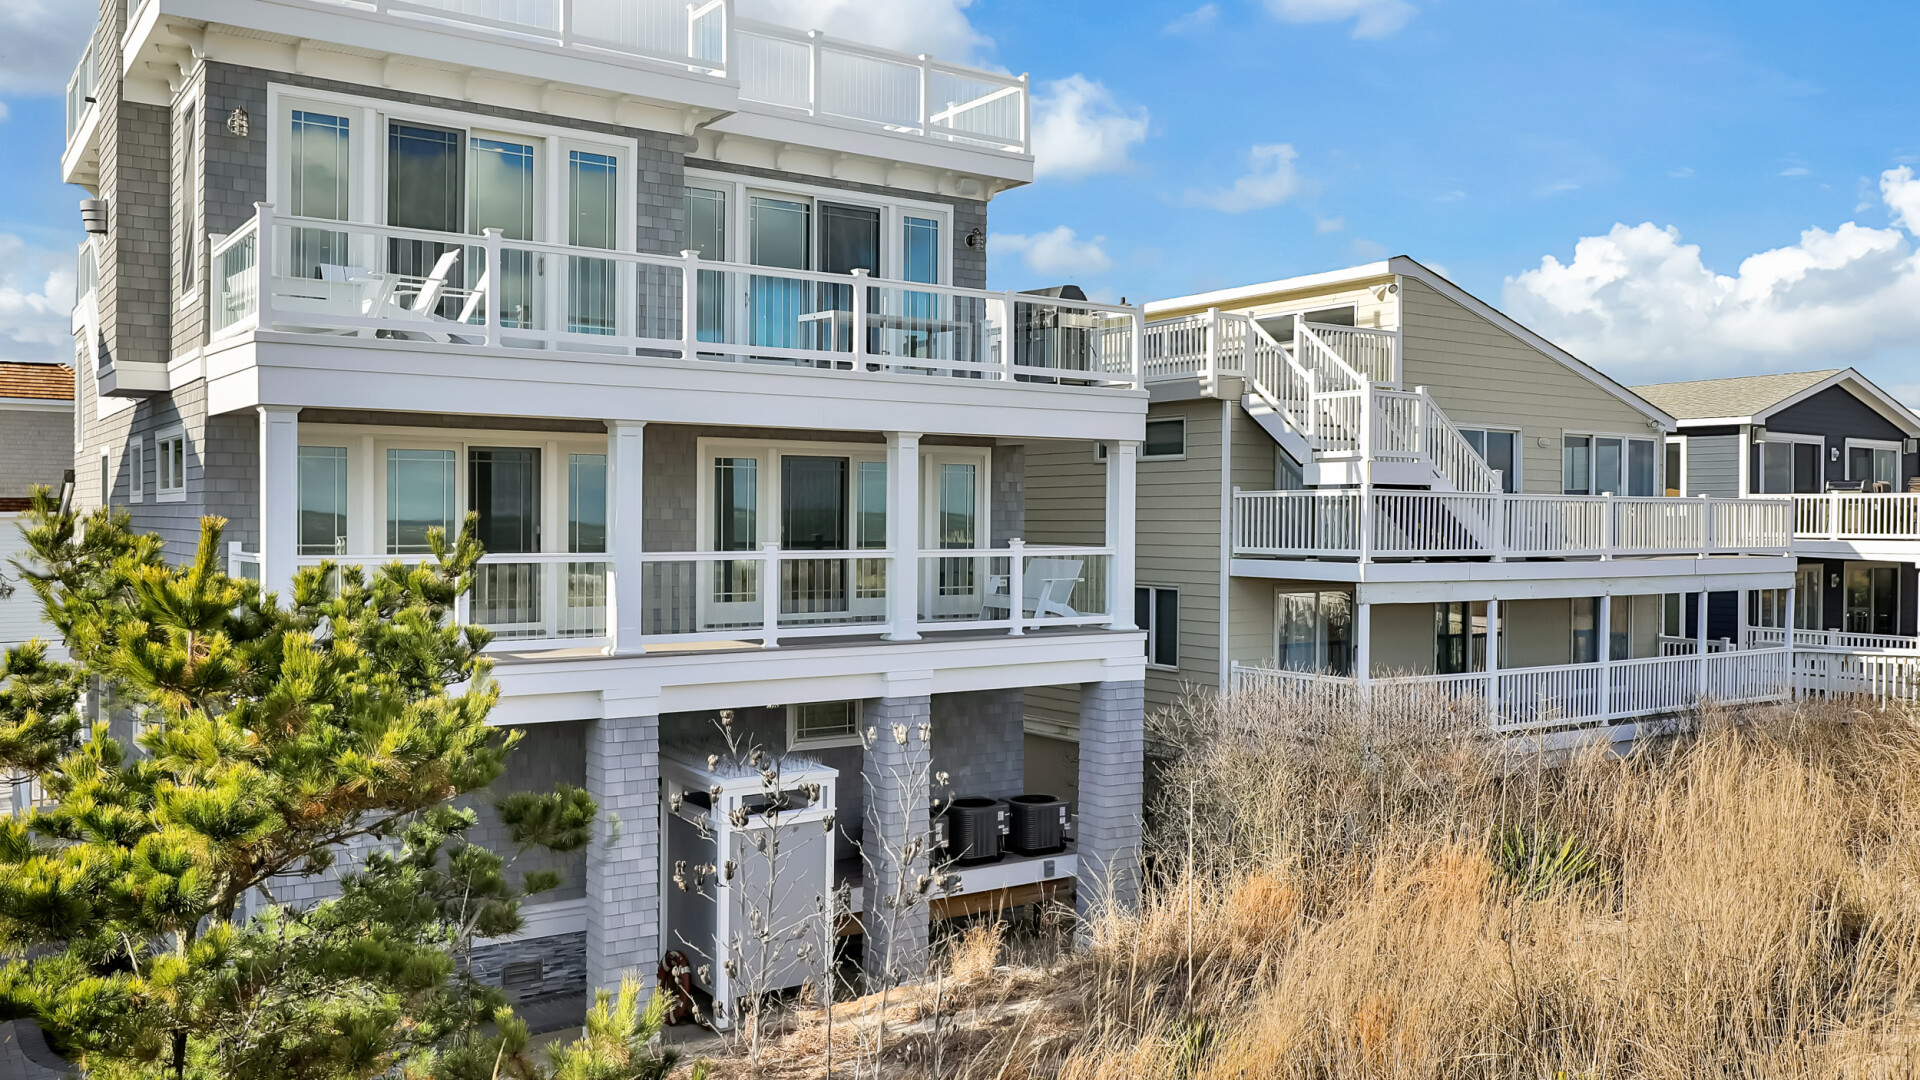 Exterior of modern beach home boasting multiple balconies, including a private roof deck, Long Beach Island NJ